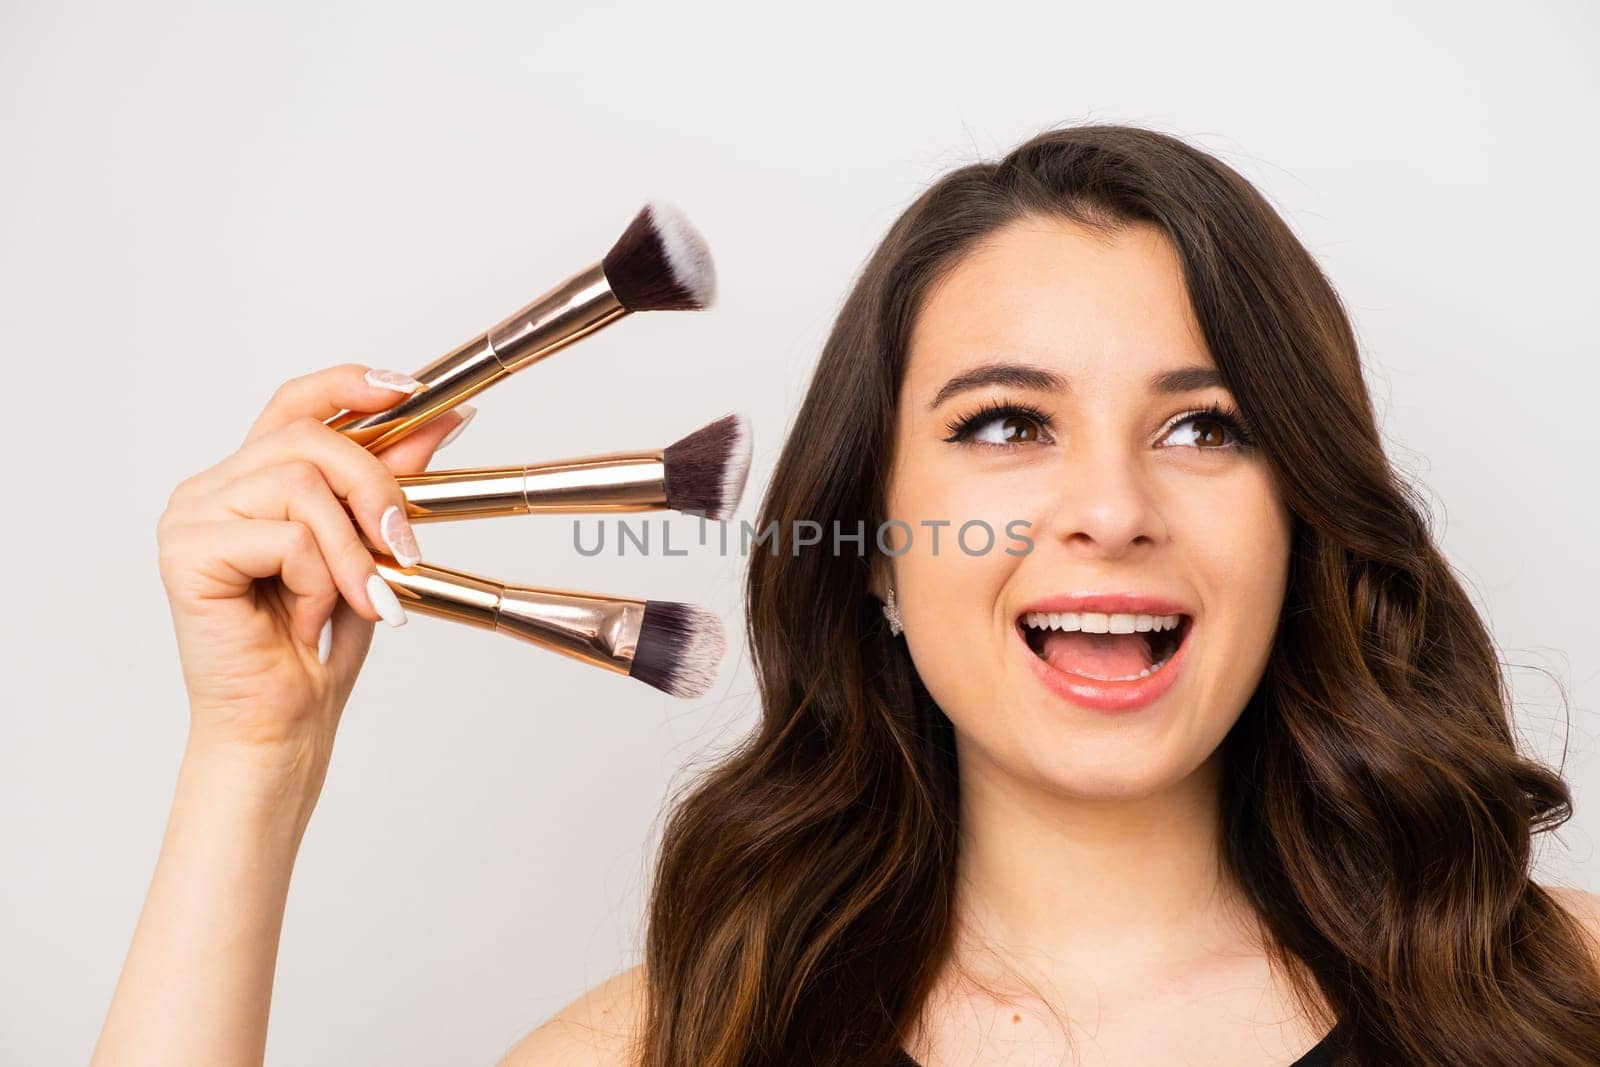 Positive attractive woman holding cosmetic makeup brushes over gray background.